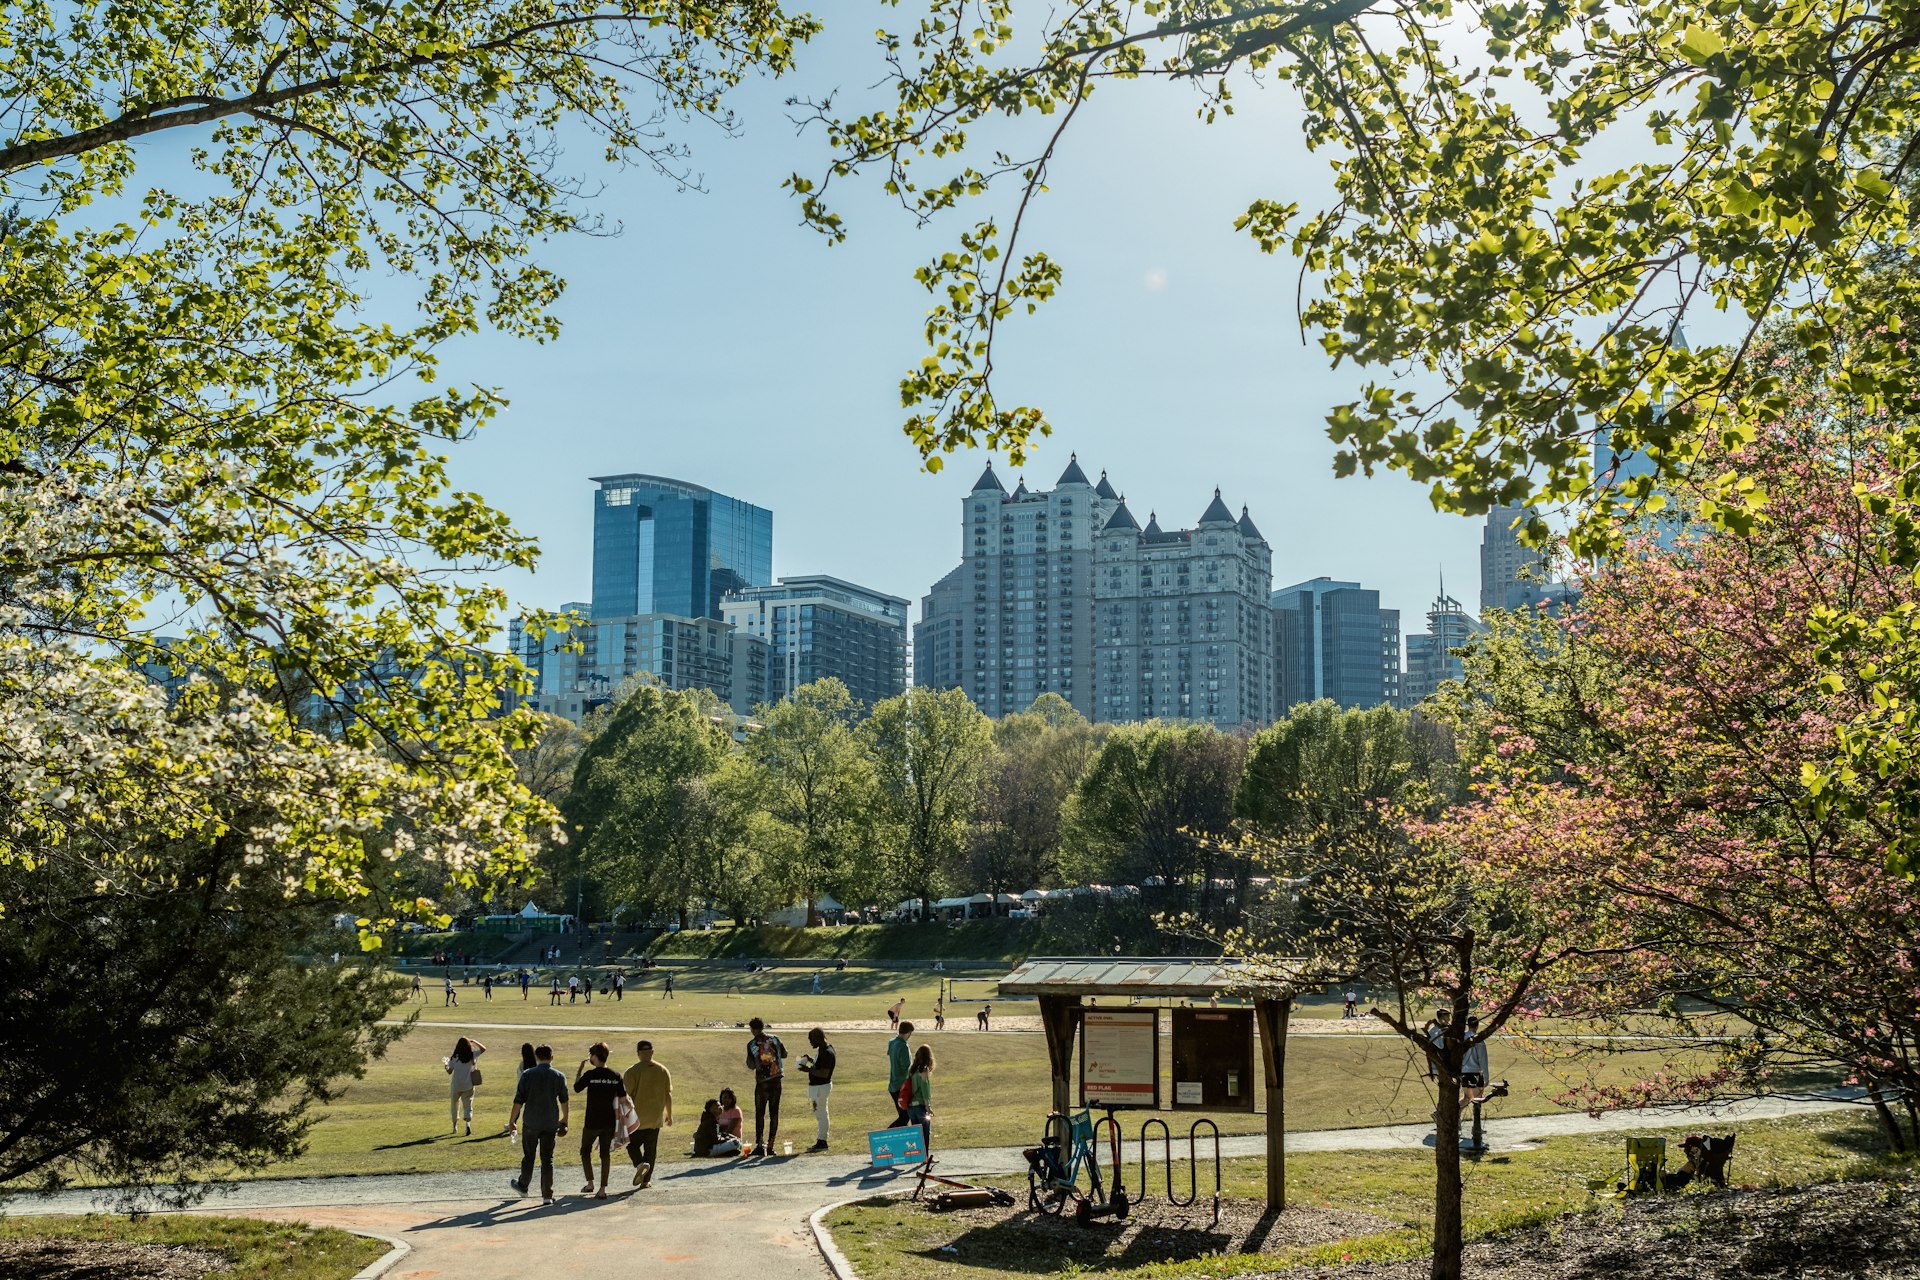 Many people are relaxing and walking in the huge green spaces of Pietmont Park on a sunny day, with a view of the Atlanta skyline beyond the trees